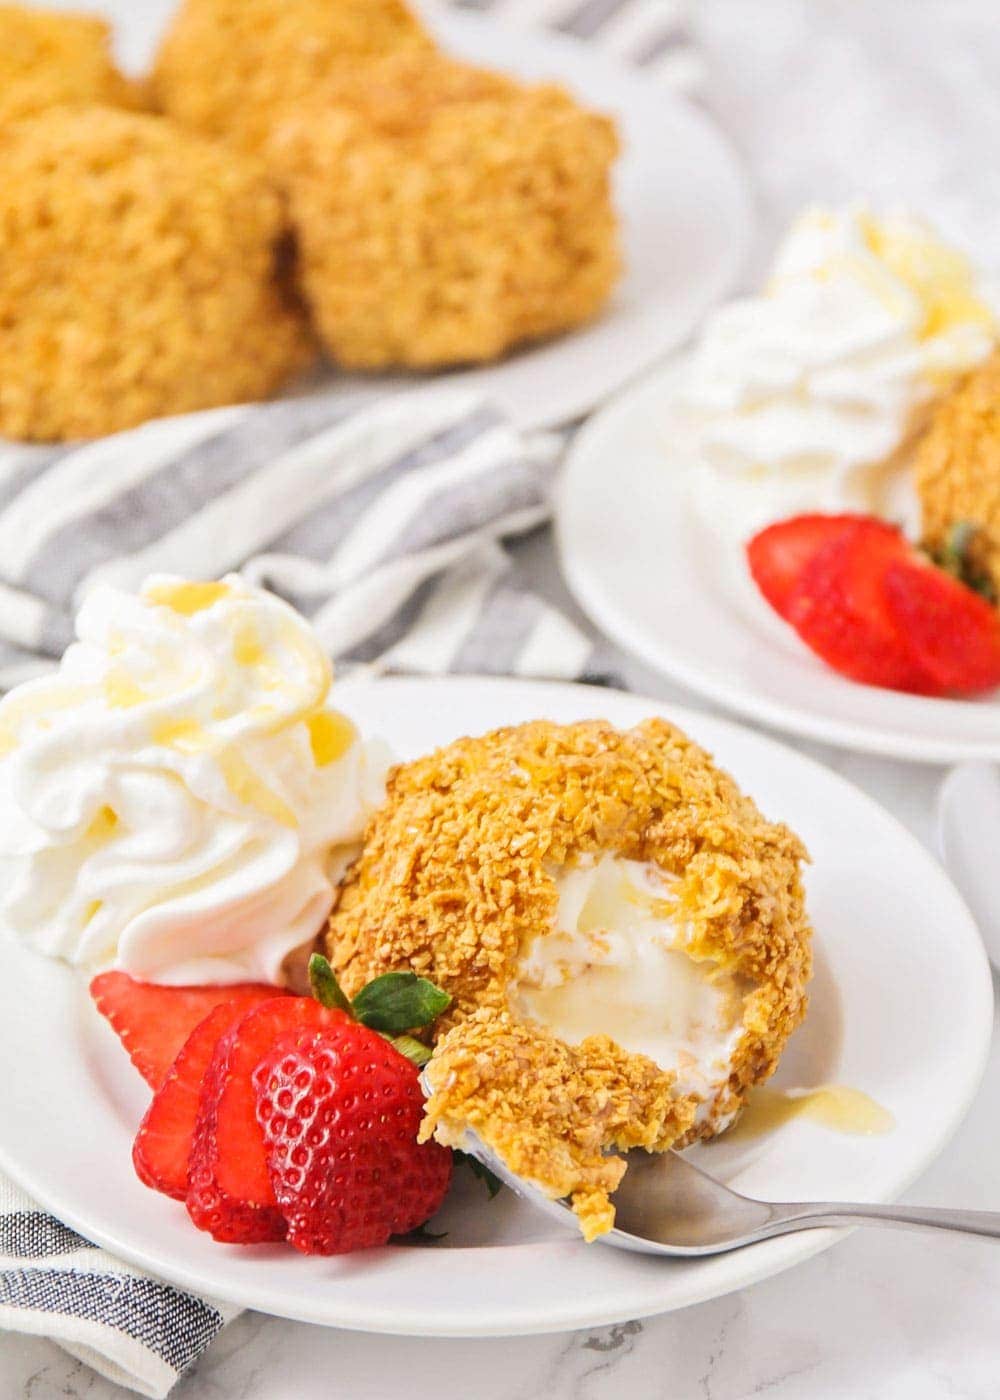 Fried ice cream with a missing bite, served with a sliced strawberry and whipped cream.